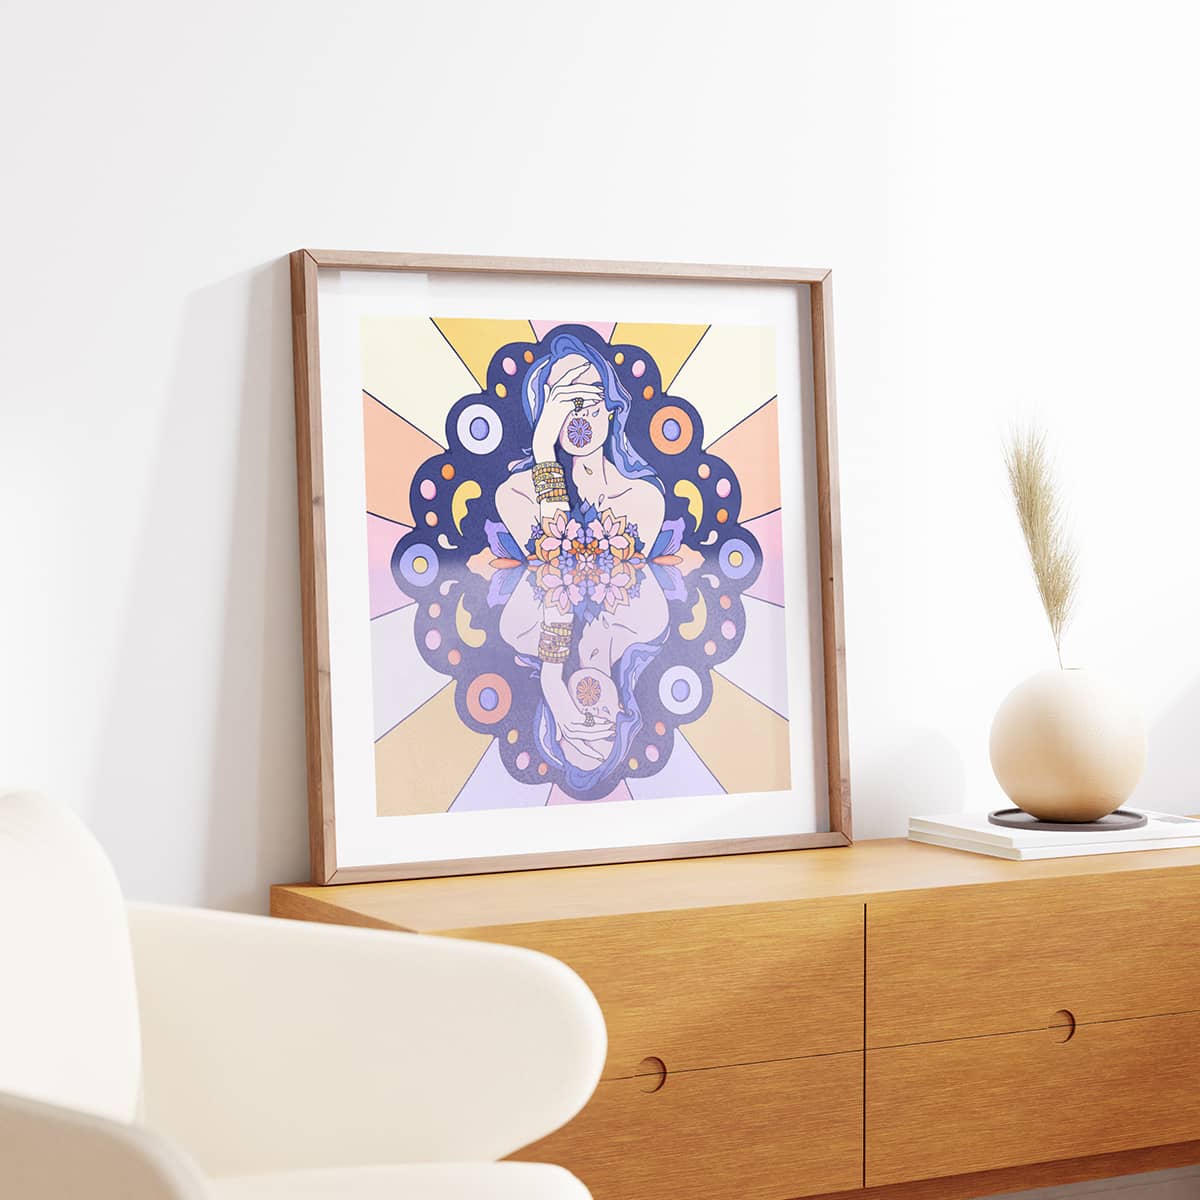 Blue and pink graphic illustration of a woman crying on display in a scandi interior